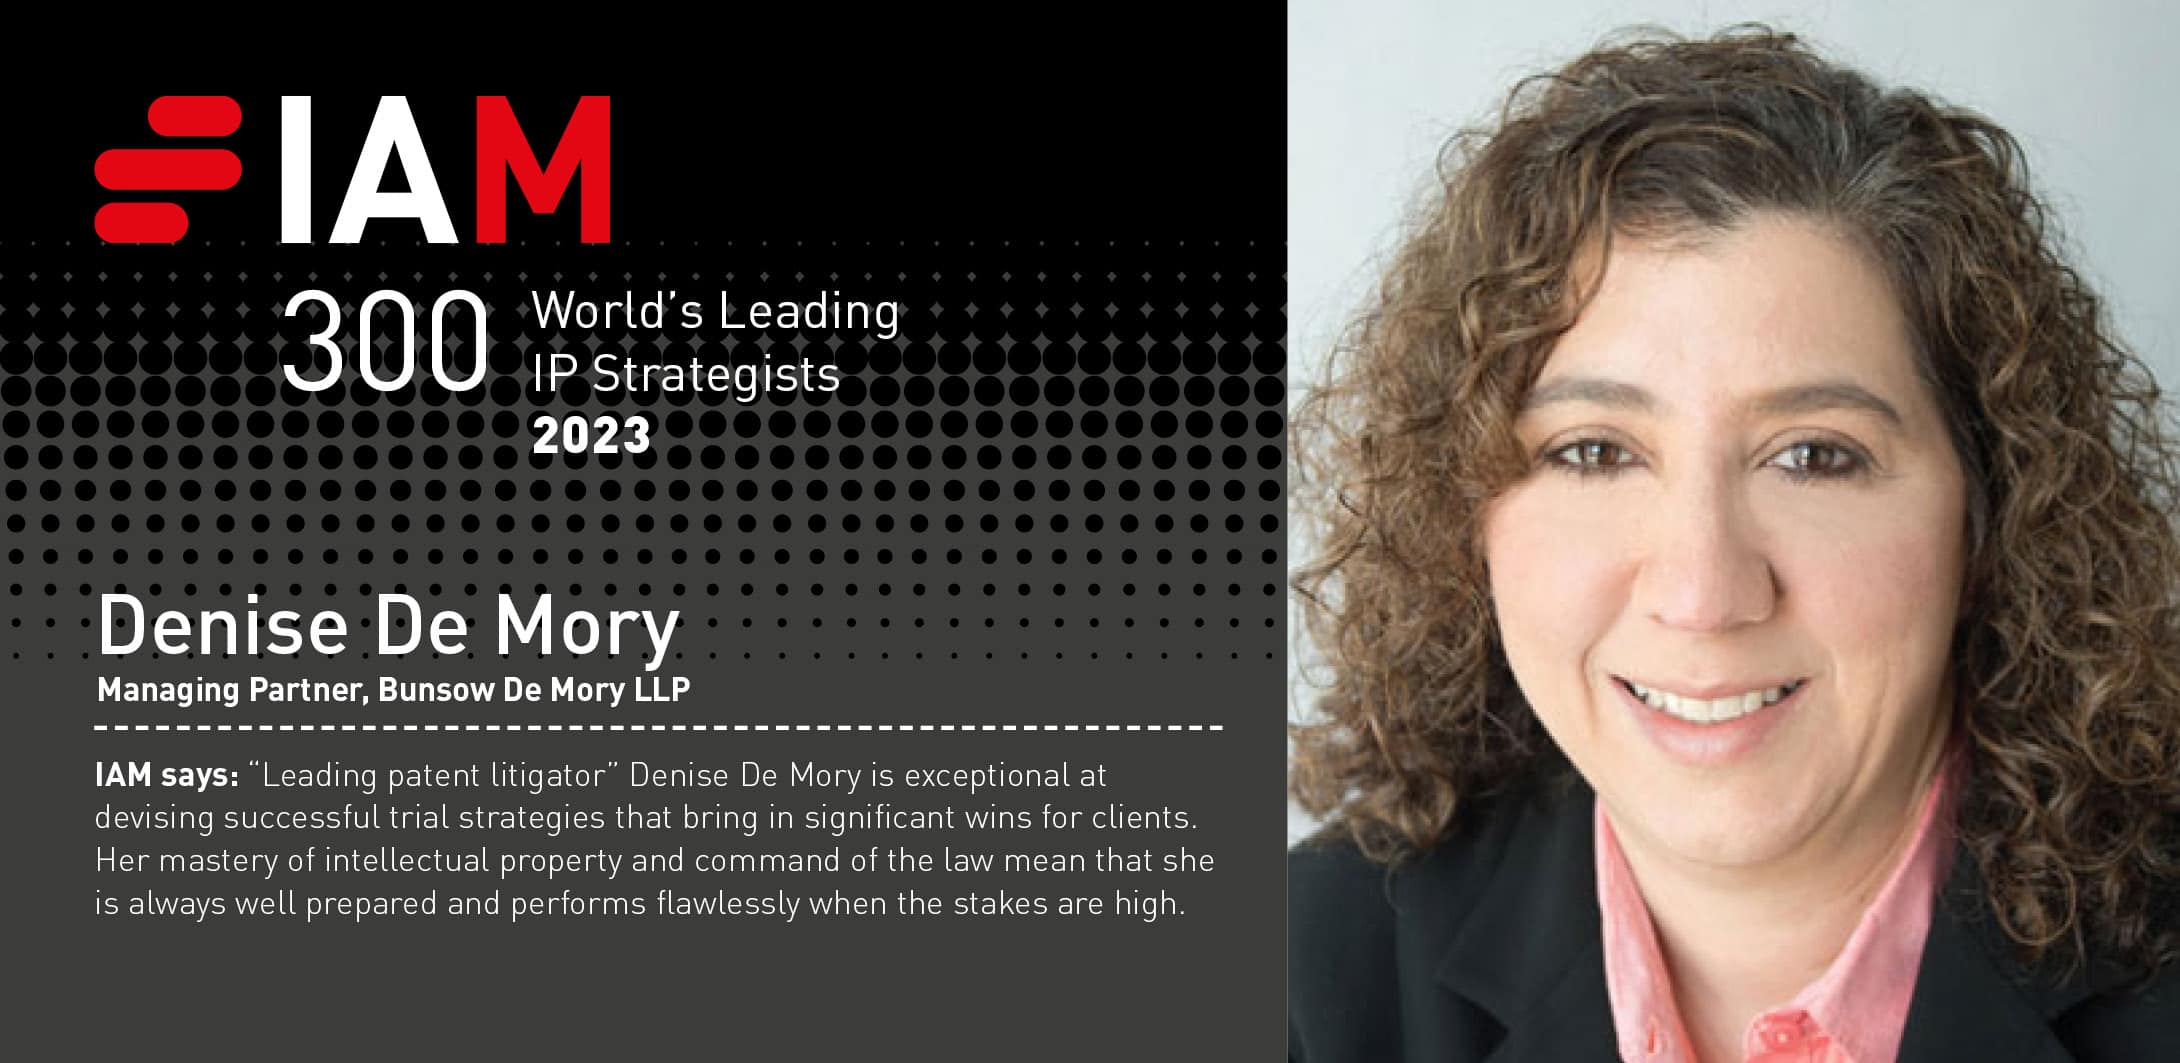 Denise De Mory Named a 2023 Top IP Strategist by IAM Strategy 300